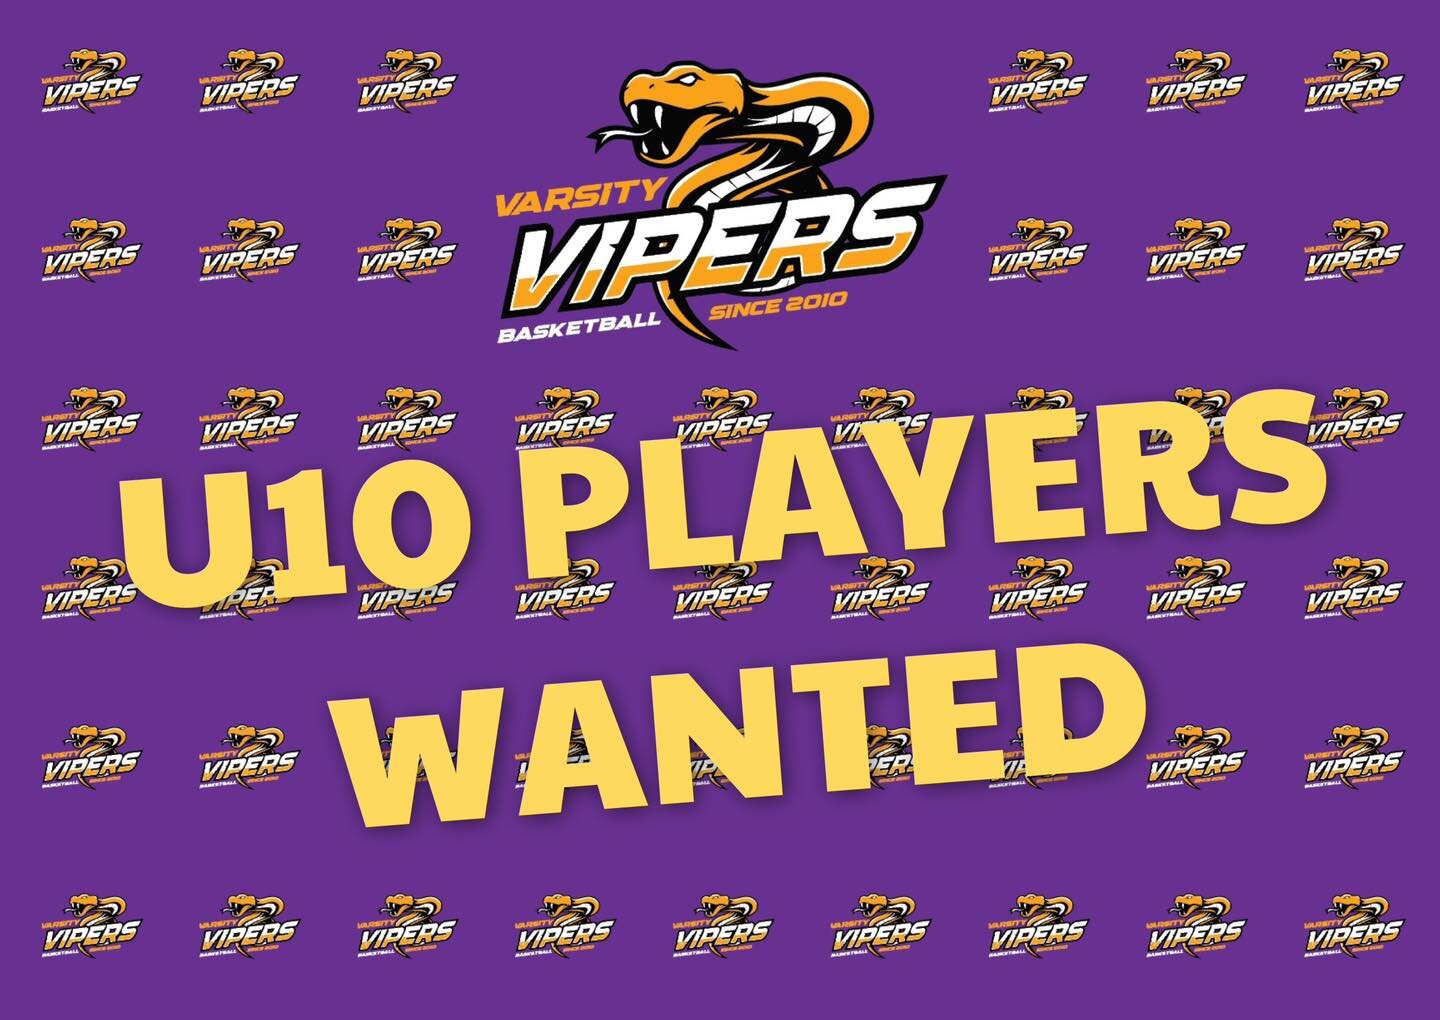 U10 PLAYERS WANTED! 🏀

We&rsquo;re looking for 1 or 2 players to join our u10 Winter Competition Boys team 🏀

If interested please email us at: info@varsityvipers.com.au